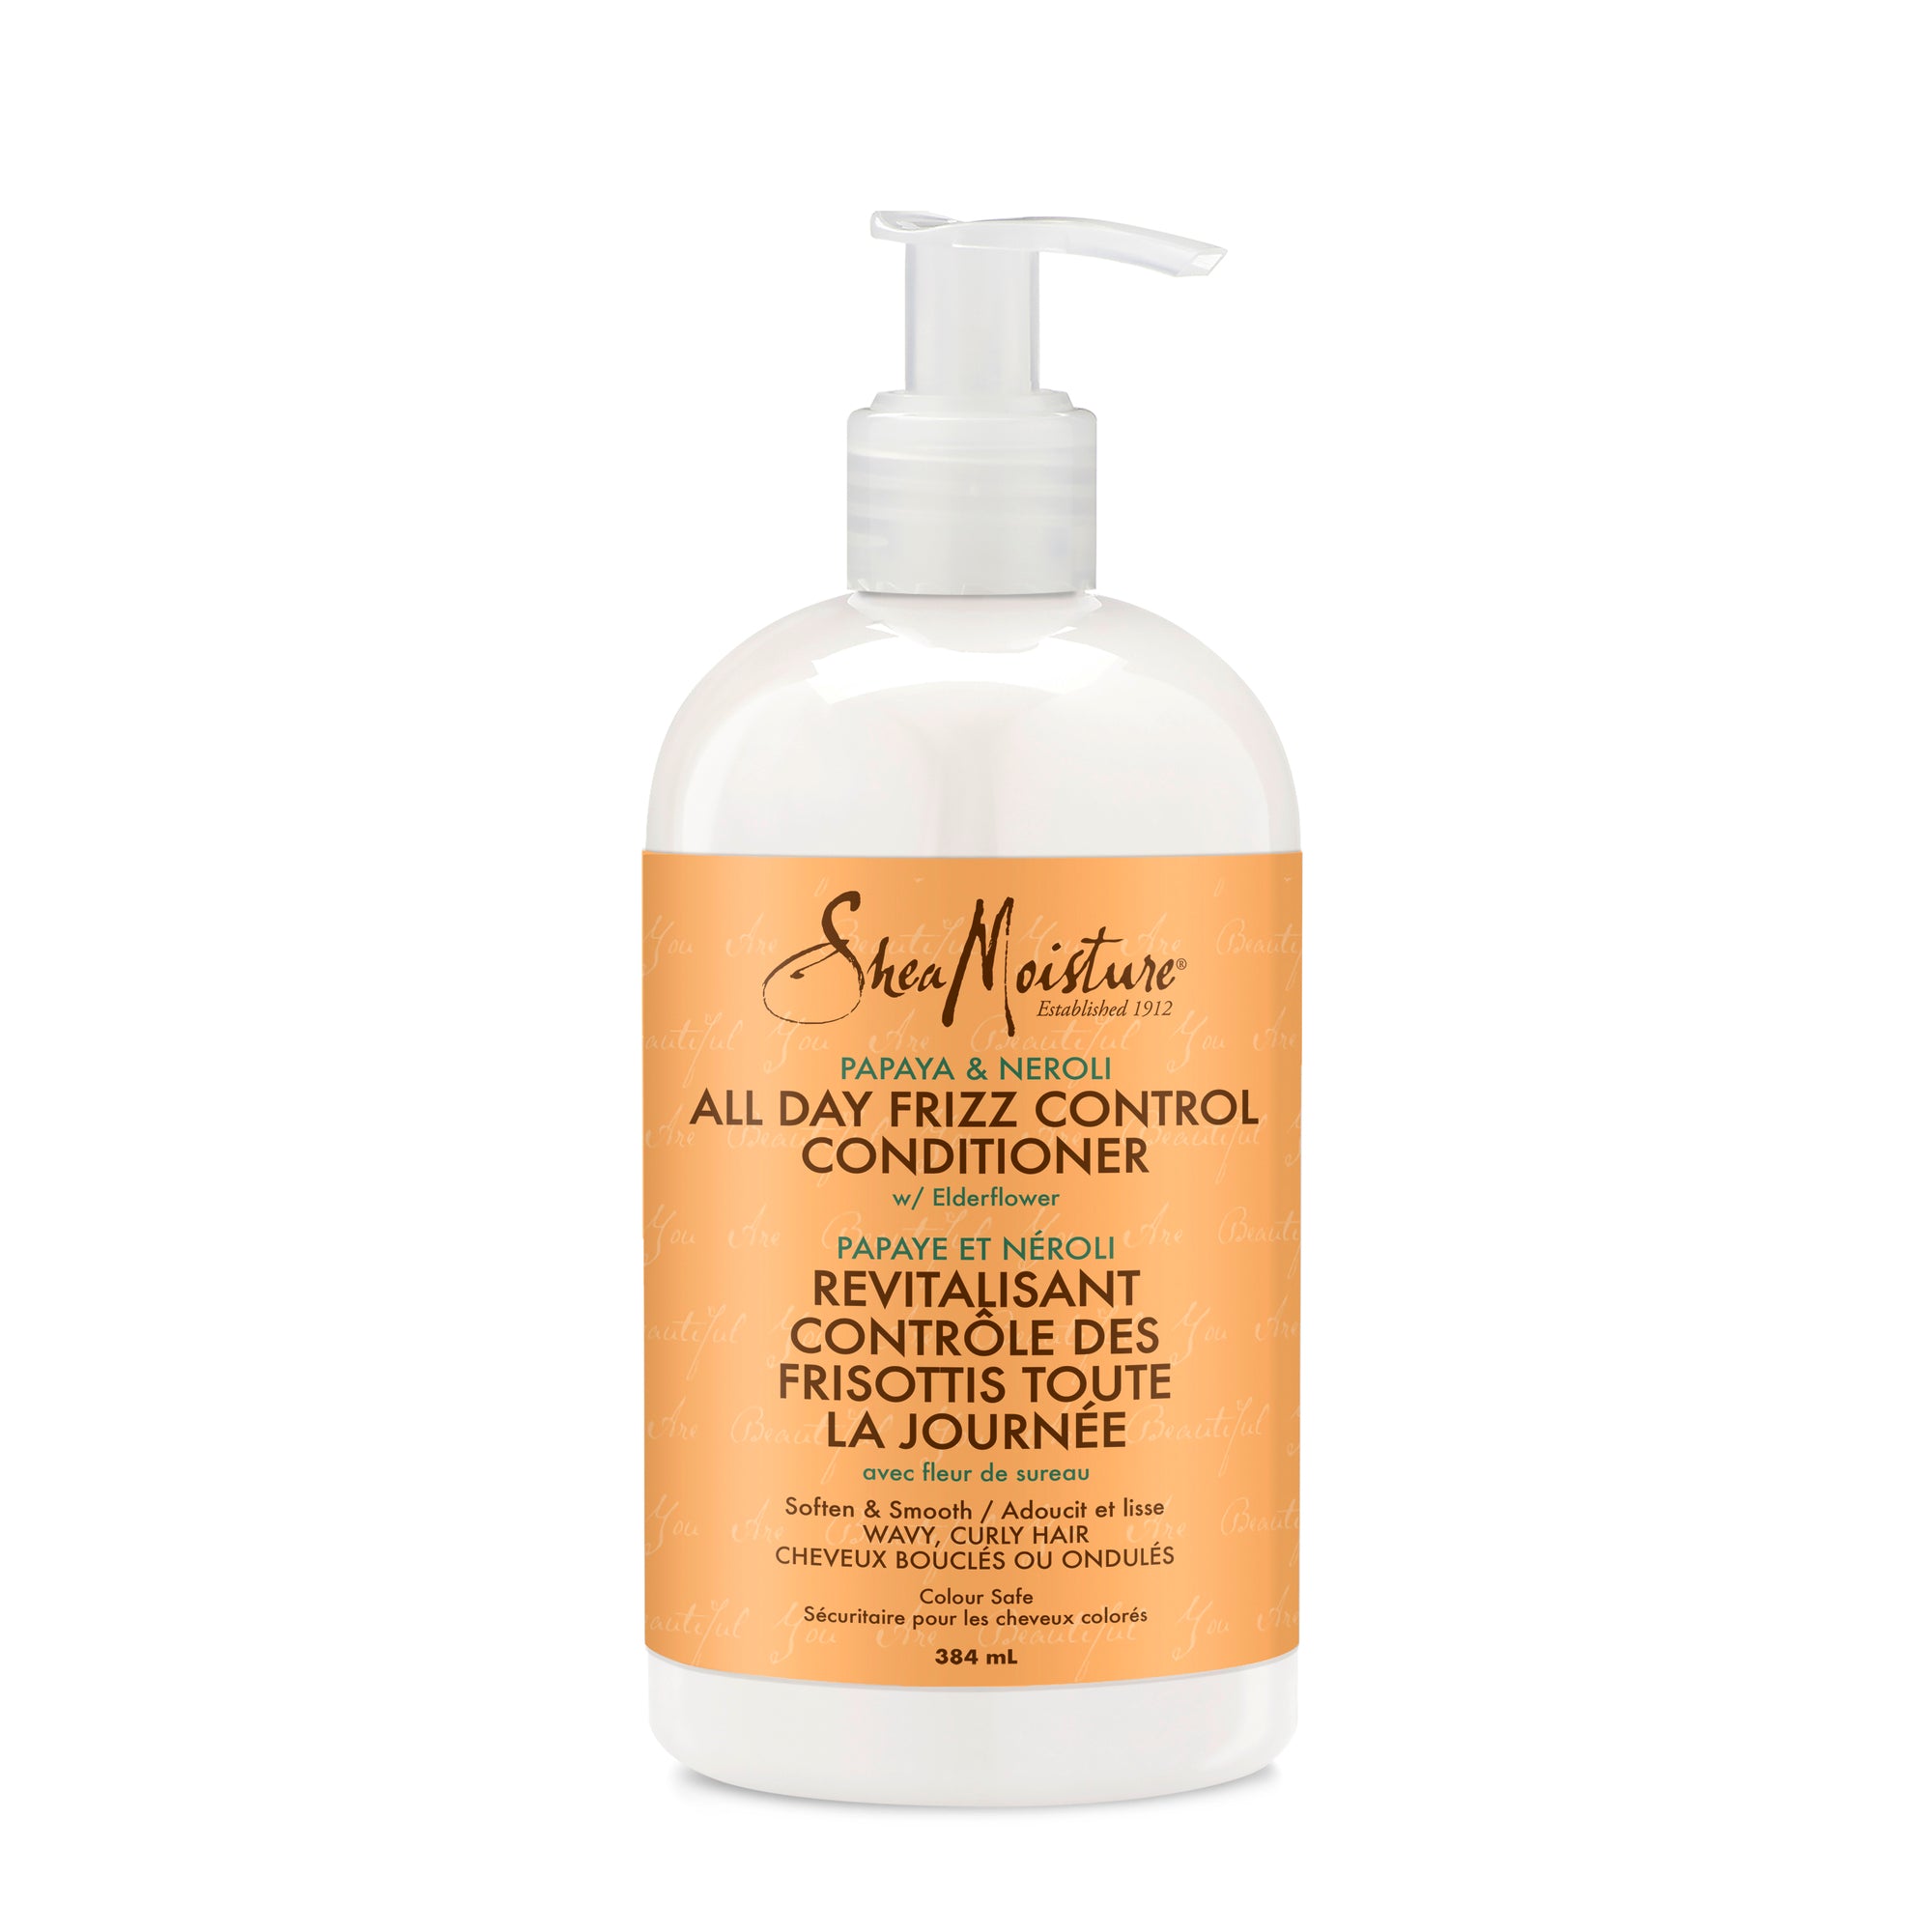 Showing the front angle view of the SheaMoisture Papaya & Neroli Frizz Control Conditioner 384mL product.